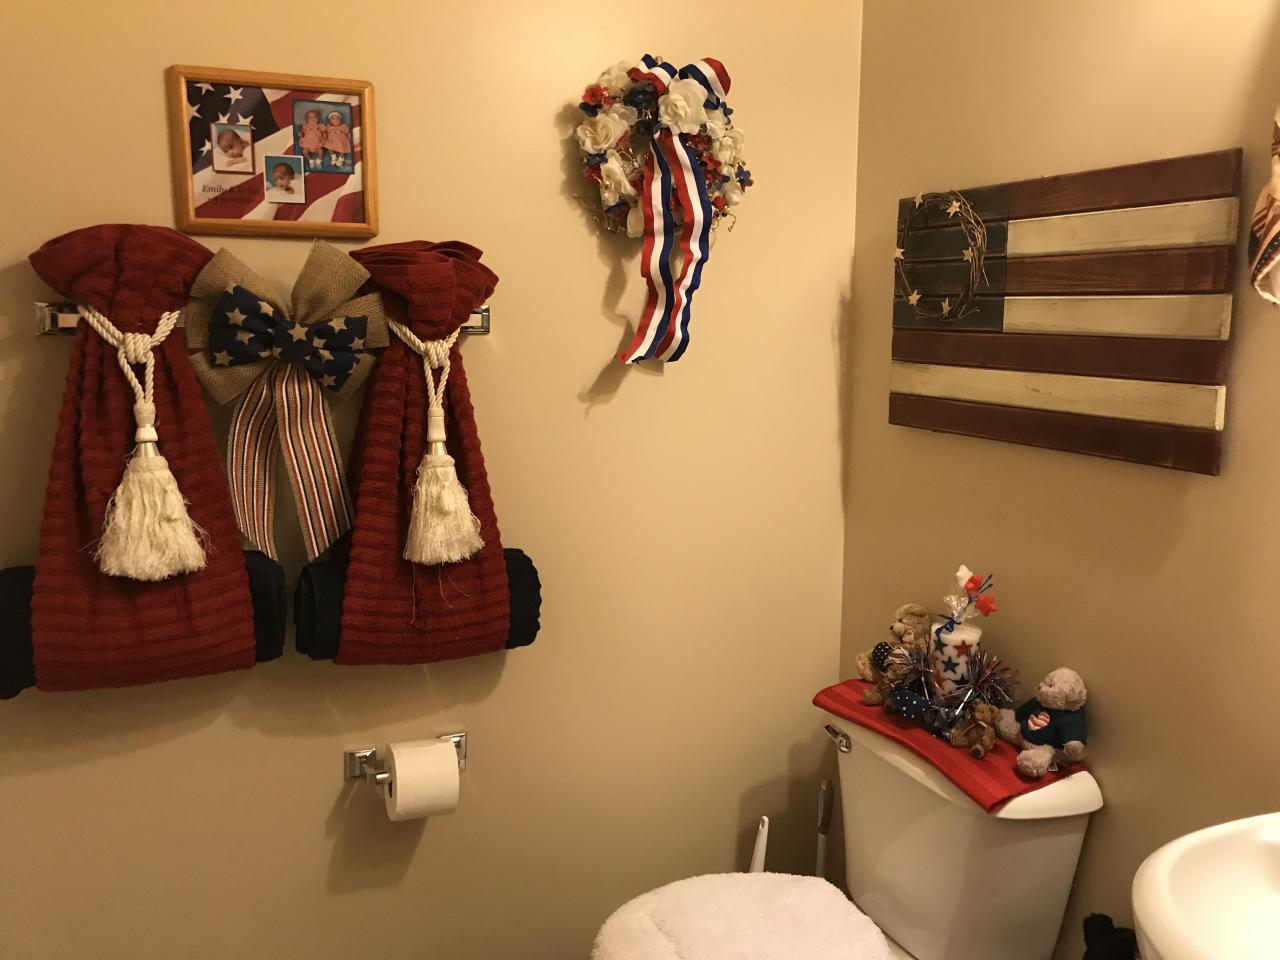 Americana bathroom decor. Top of commode, I just used a red napkin